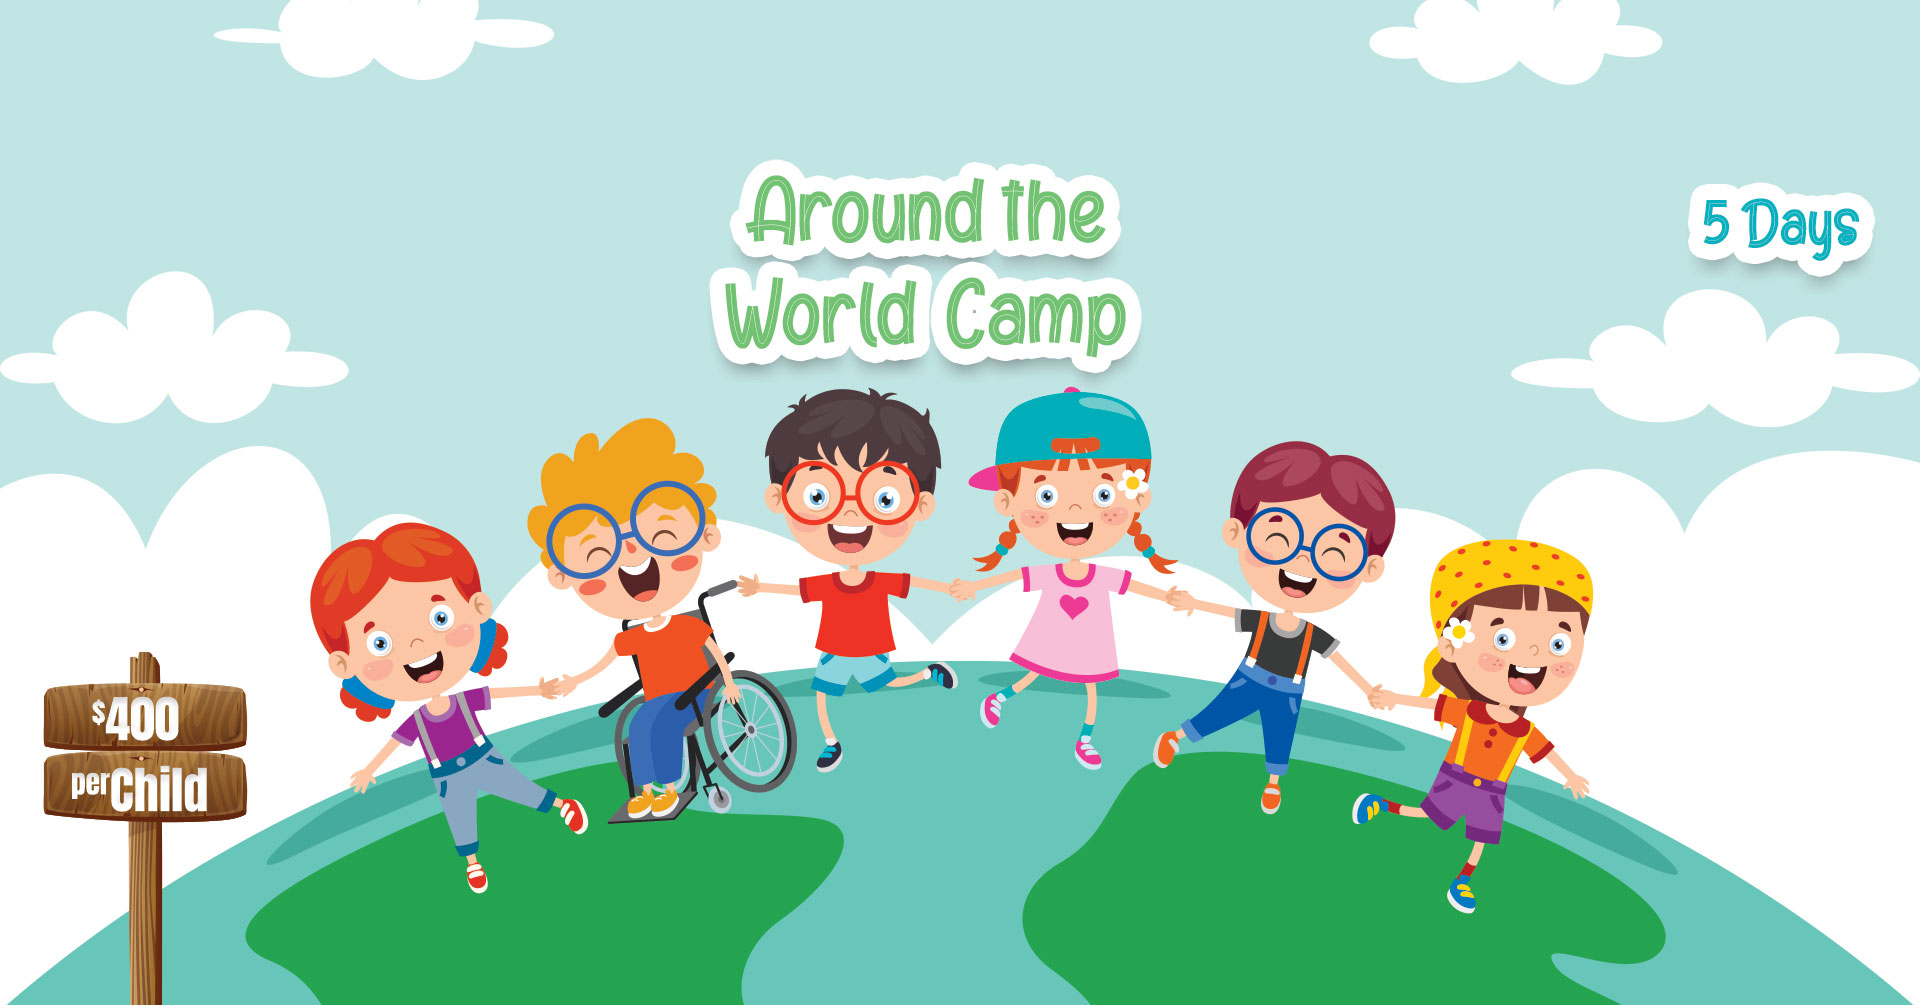 ghs-facebook-event-camps-around-the-world-5-days-rescue